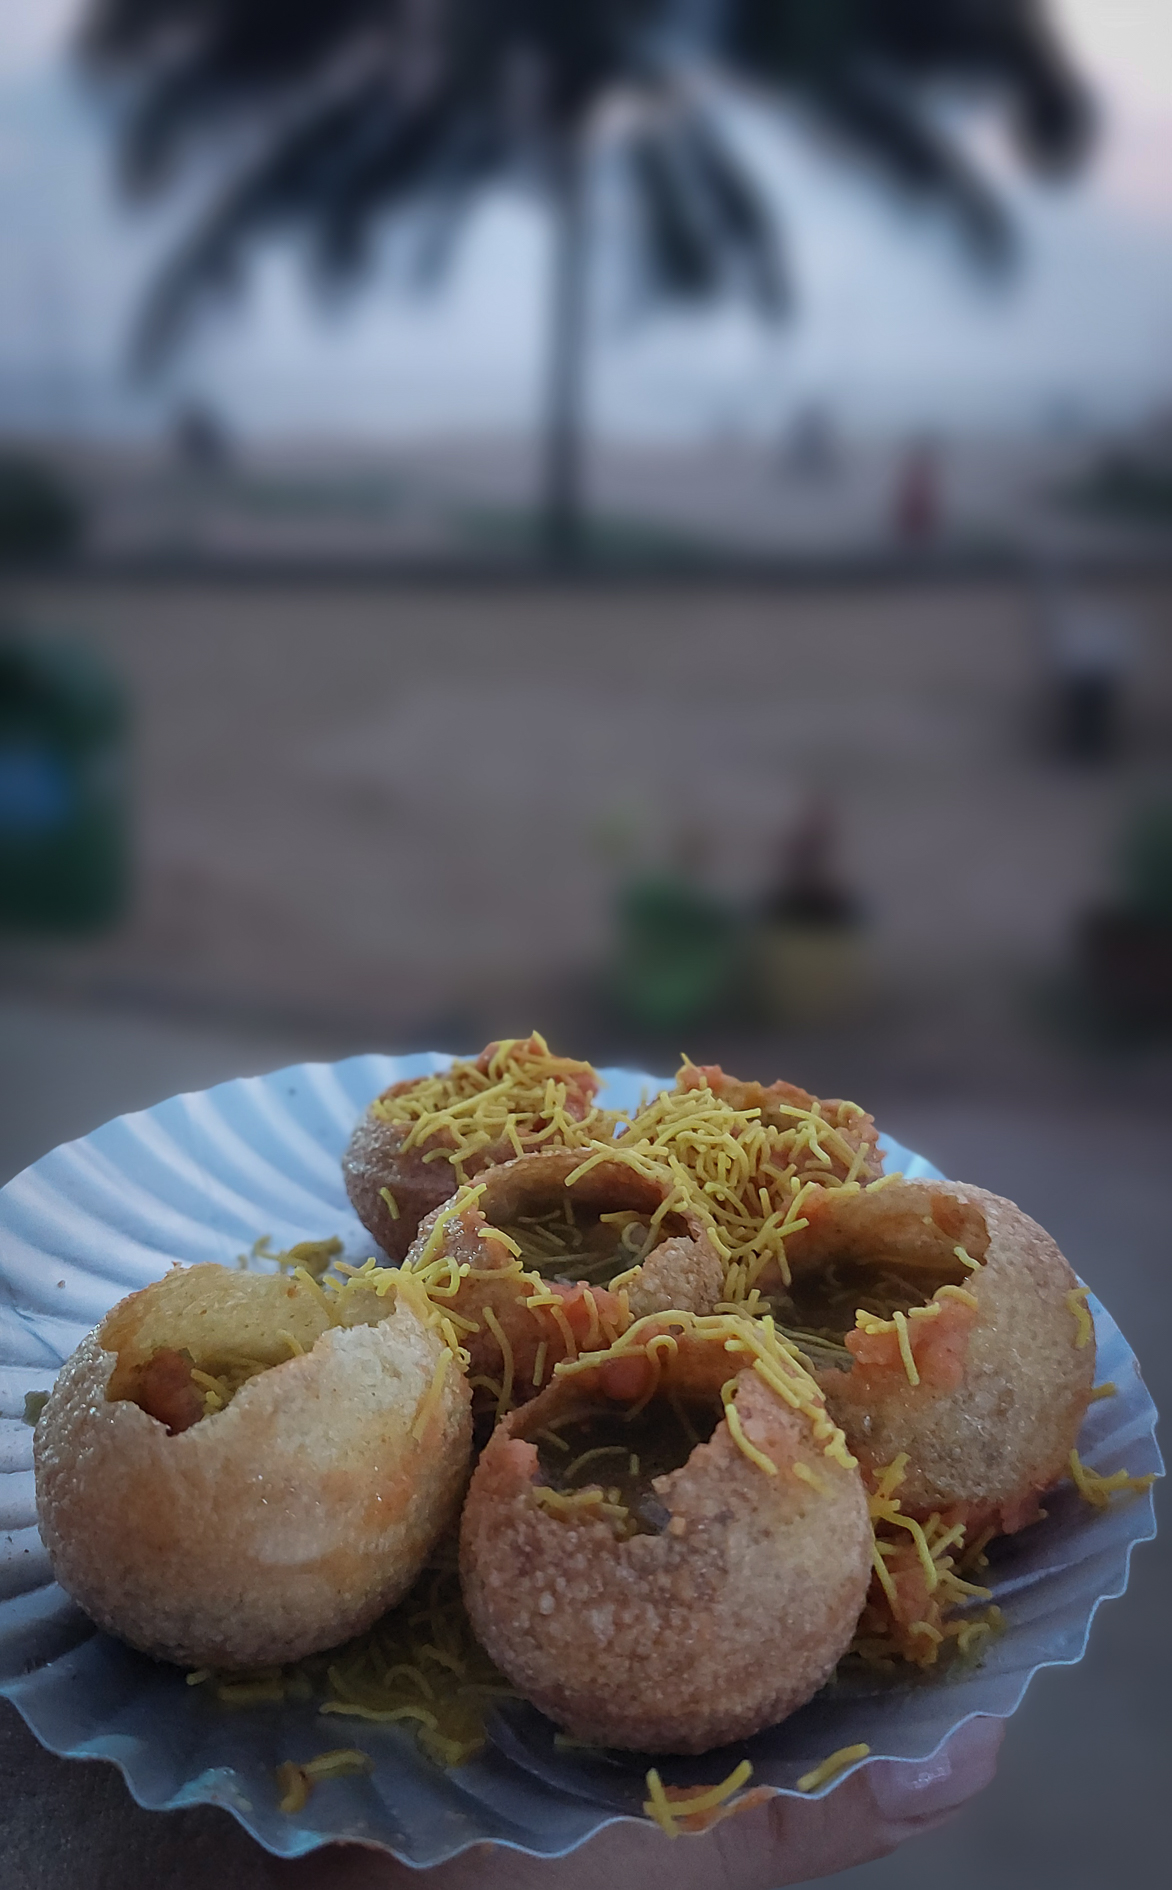 <span  class="uc_style_uc_tiles_grid_image_elementor_uc_items_attribute_title" style="color:#ffffff;">One of the wonderful Indian dishes: 'Puri'</span>